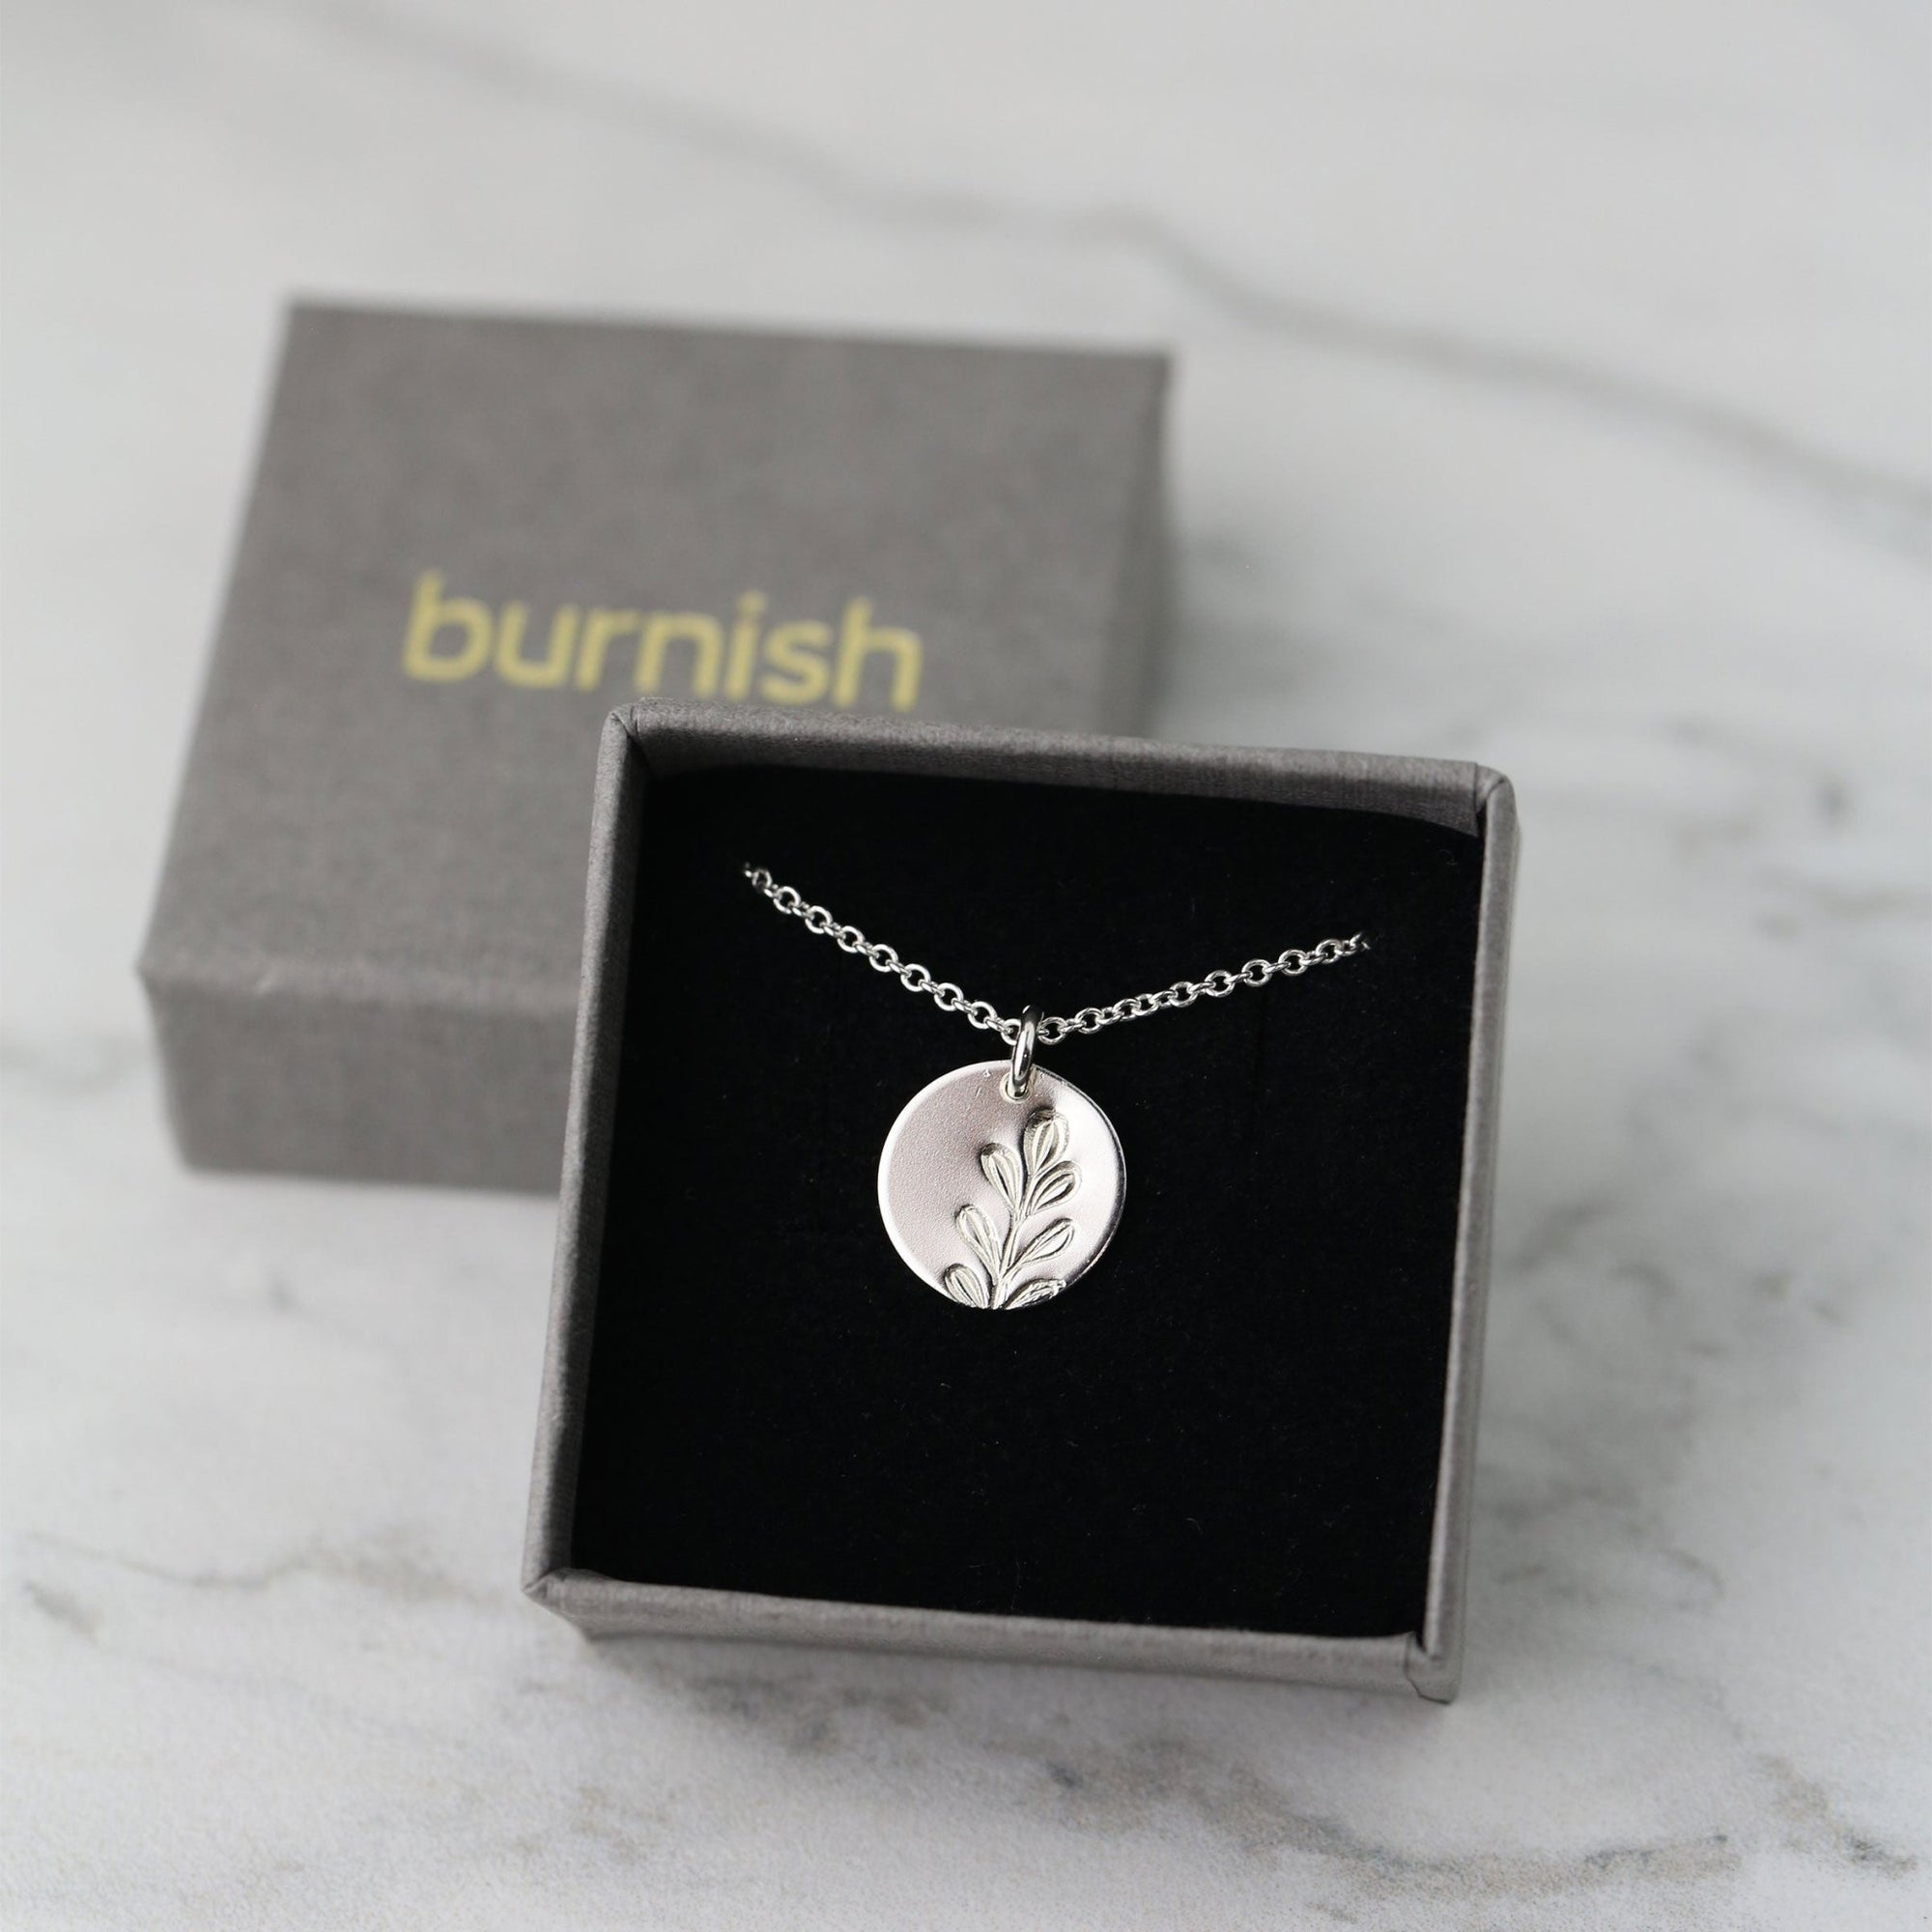 Hand Stamped Silver Botanical Disc Necklace